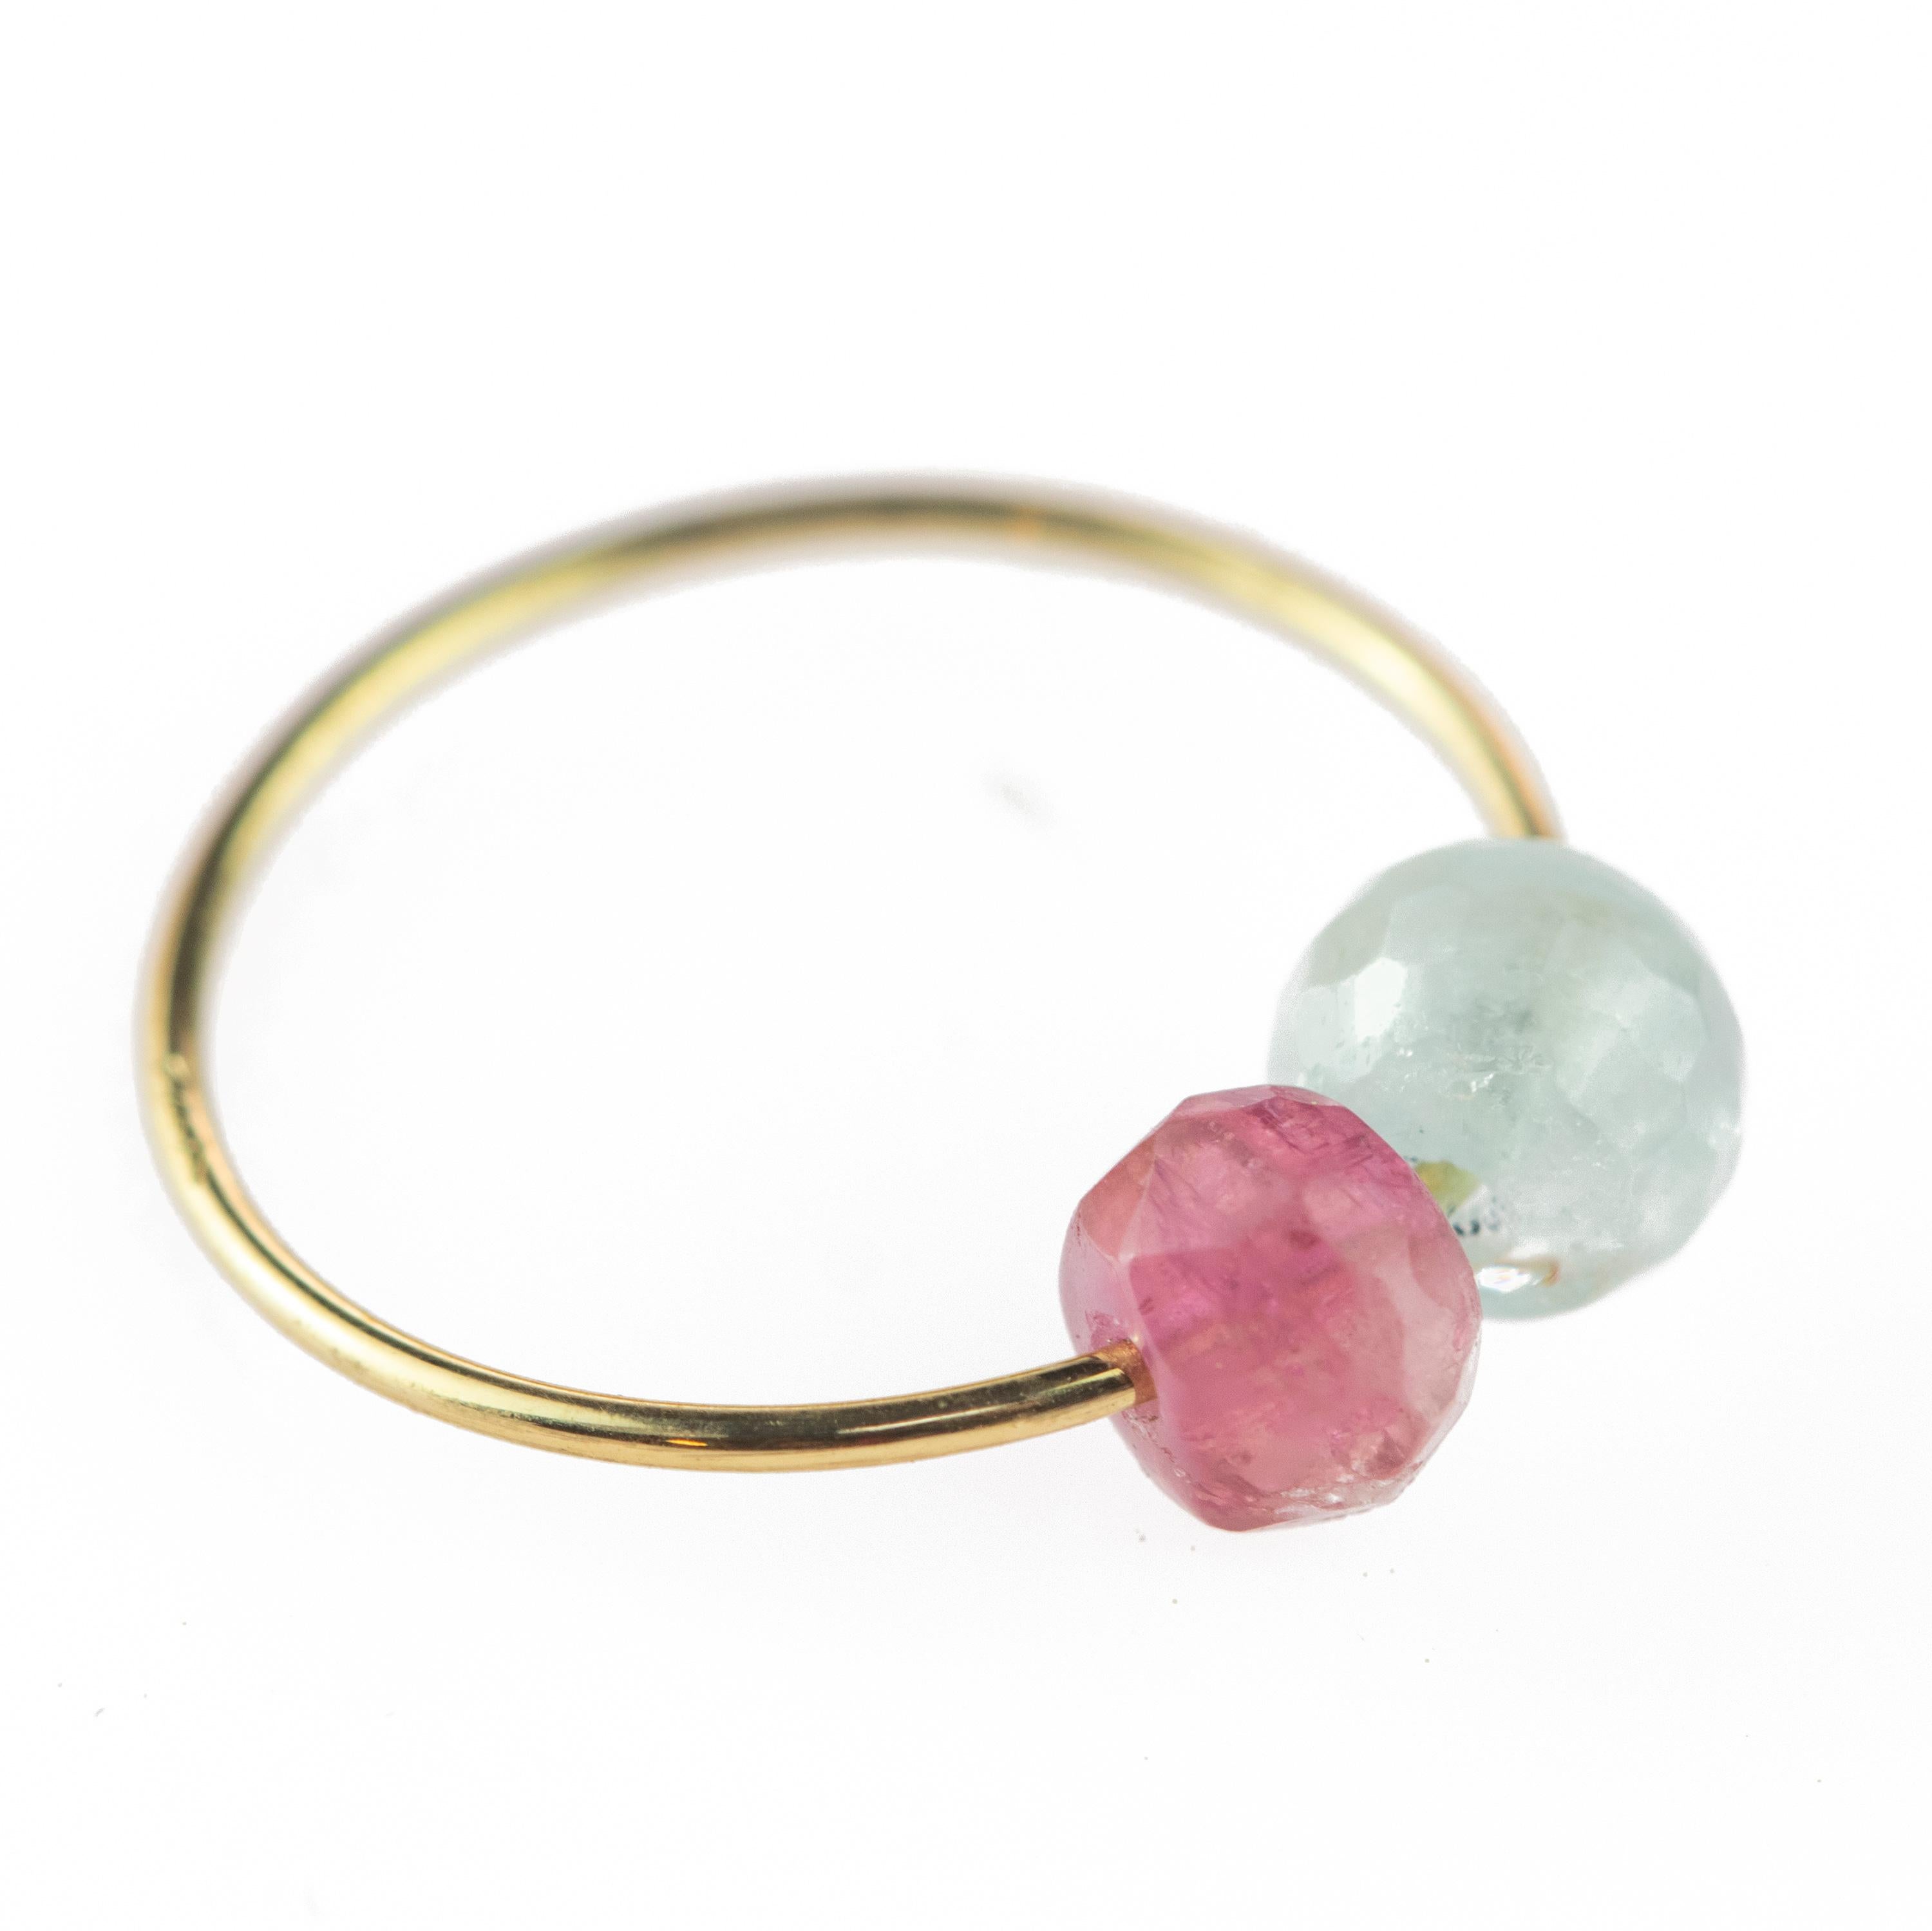 Signature INTINI Jewels Asteroid Planet ring. Contemporary ring design in 18 karat yellow gold with a precious aquamarine and tourmaline beads. Passion and intensity mixed in one jewel. Delight yourself with a strong, minimalist design, just for a